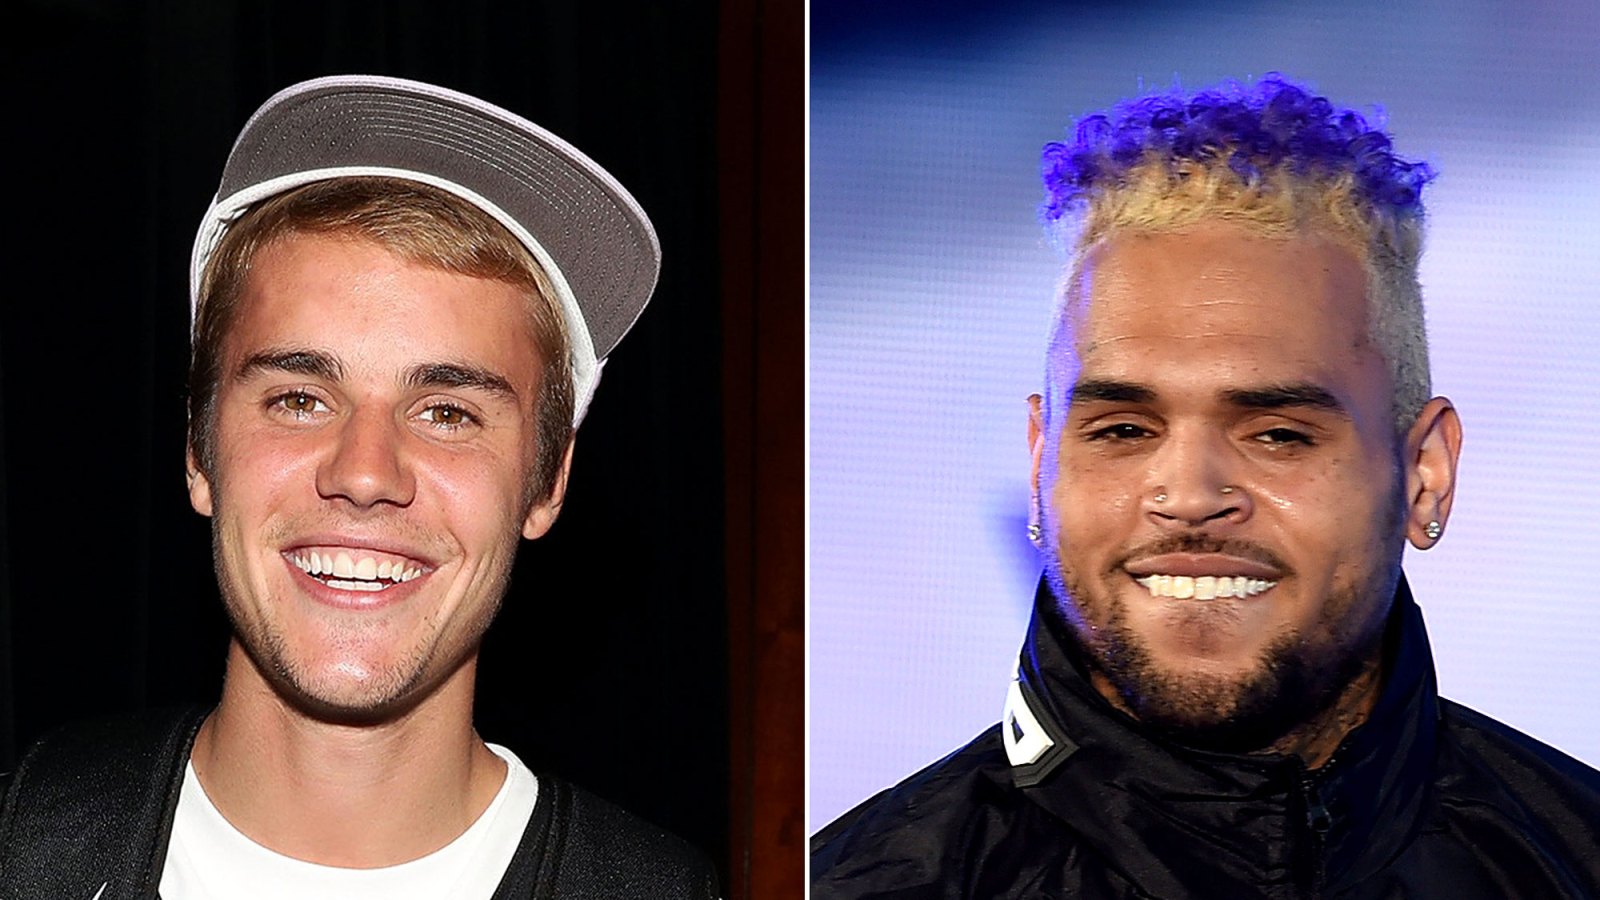 Justin Bieber Supports Chris Brown Following Rape Allegations